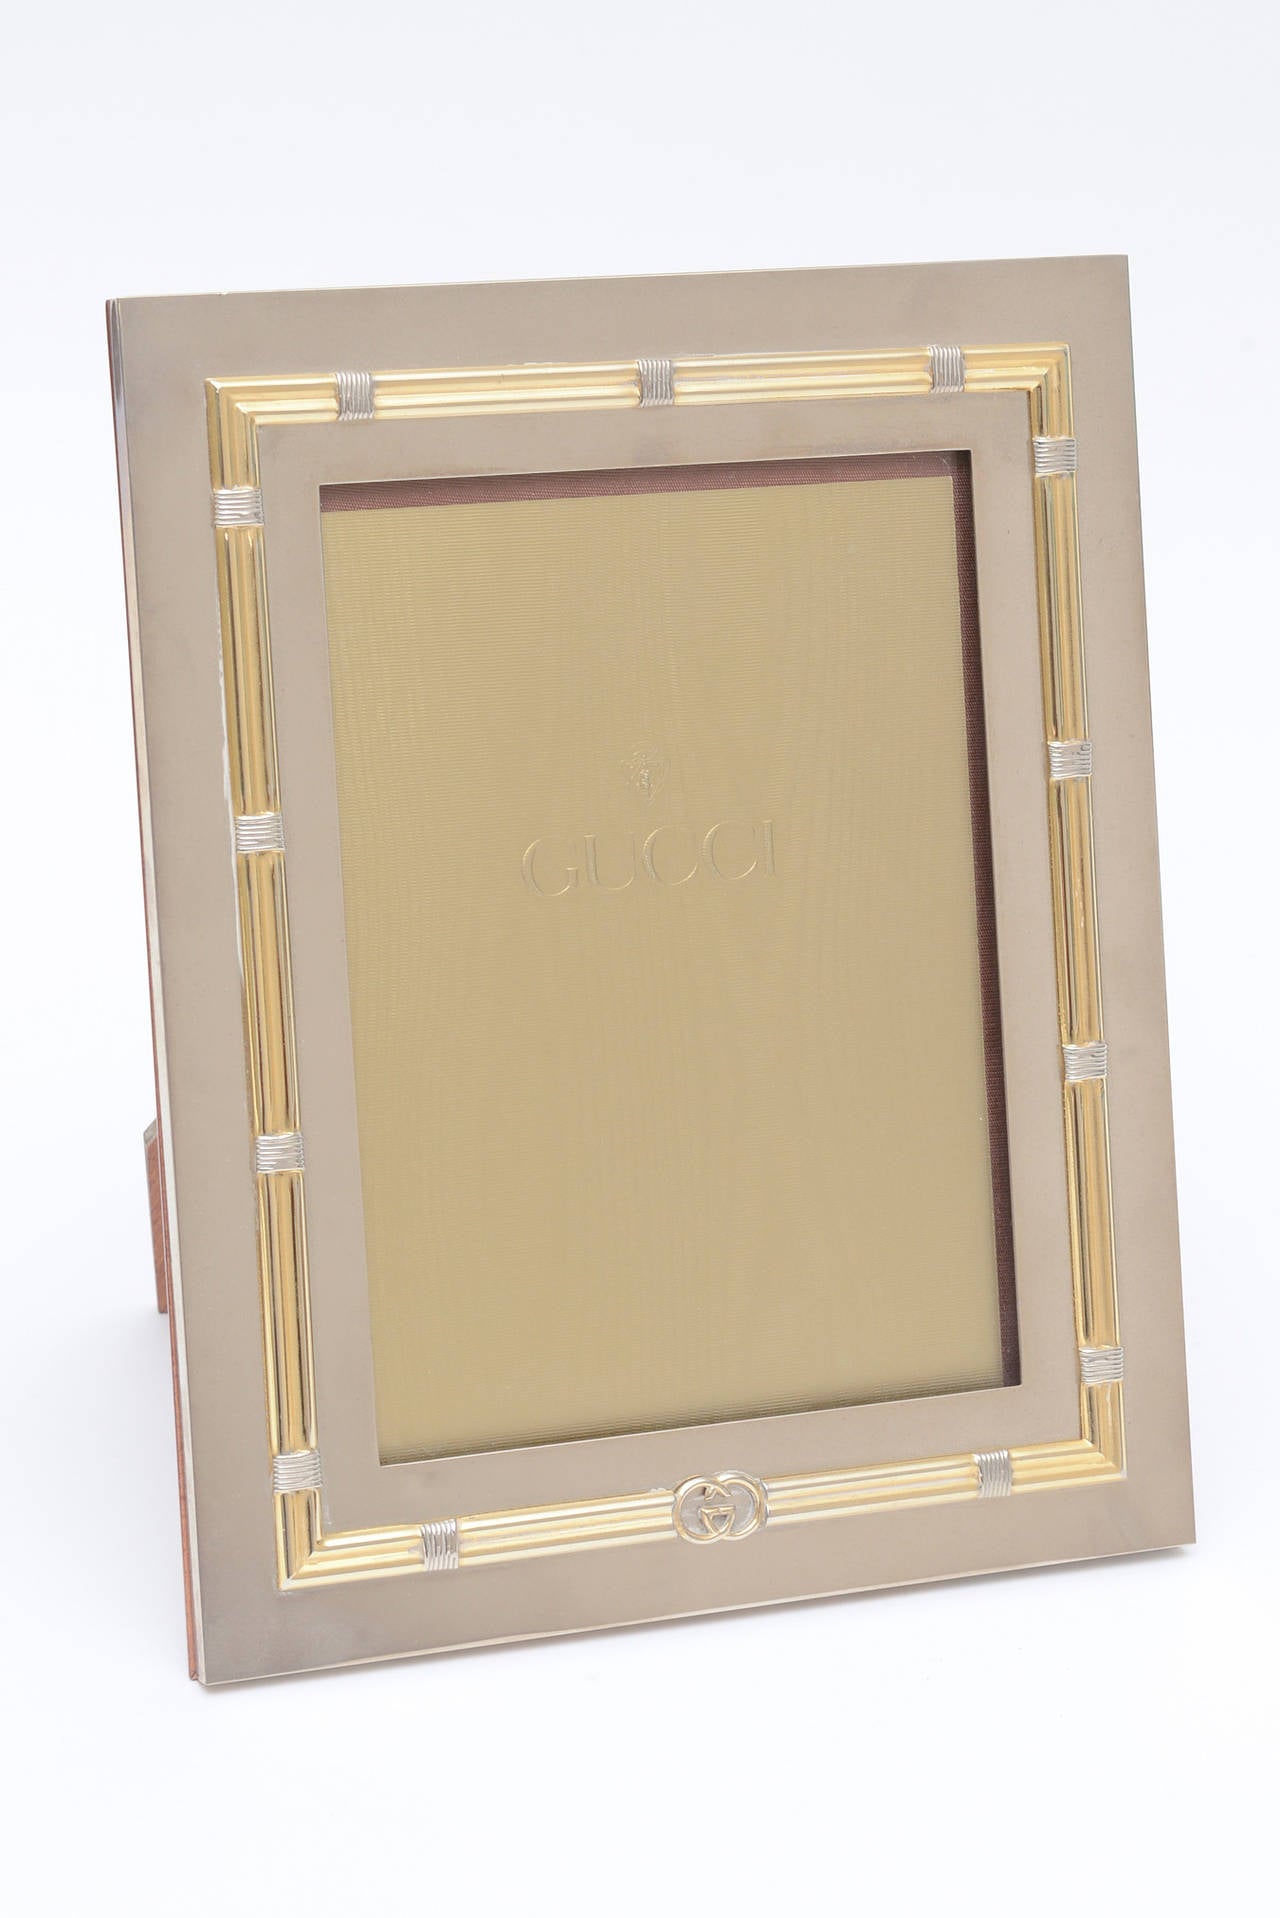 This iconic Gucci logo picture large picture frame has the walnut and rosewood backing. Dual toned.
The mix of metals adds to the versatility of this lovely picture frame.
The GG logo is at the bottom.
The ribbed banding adorns all sides, top and